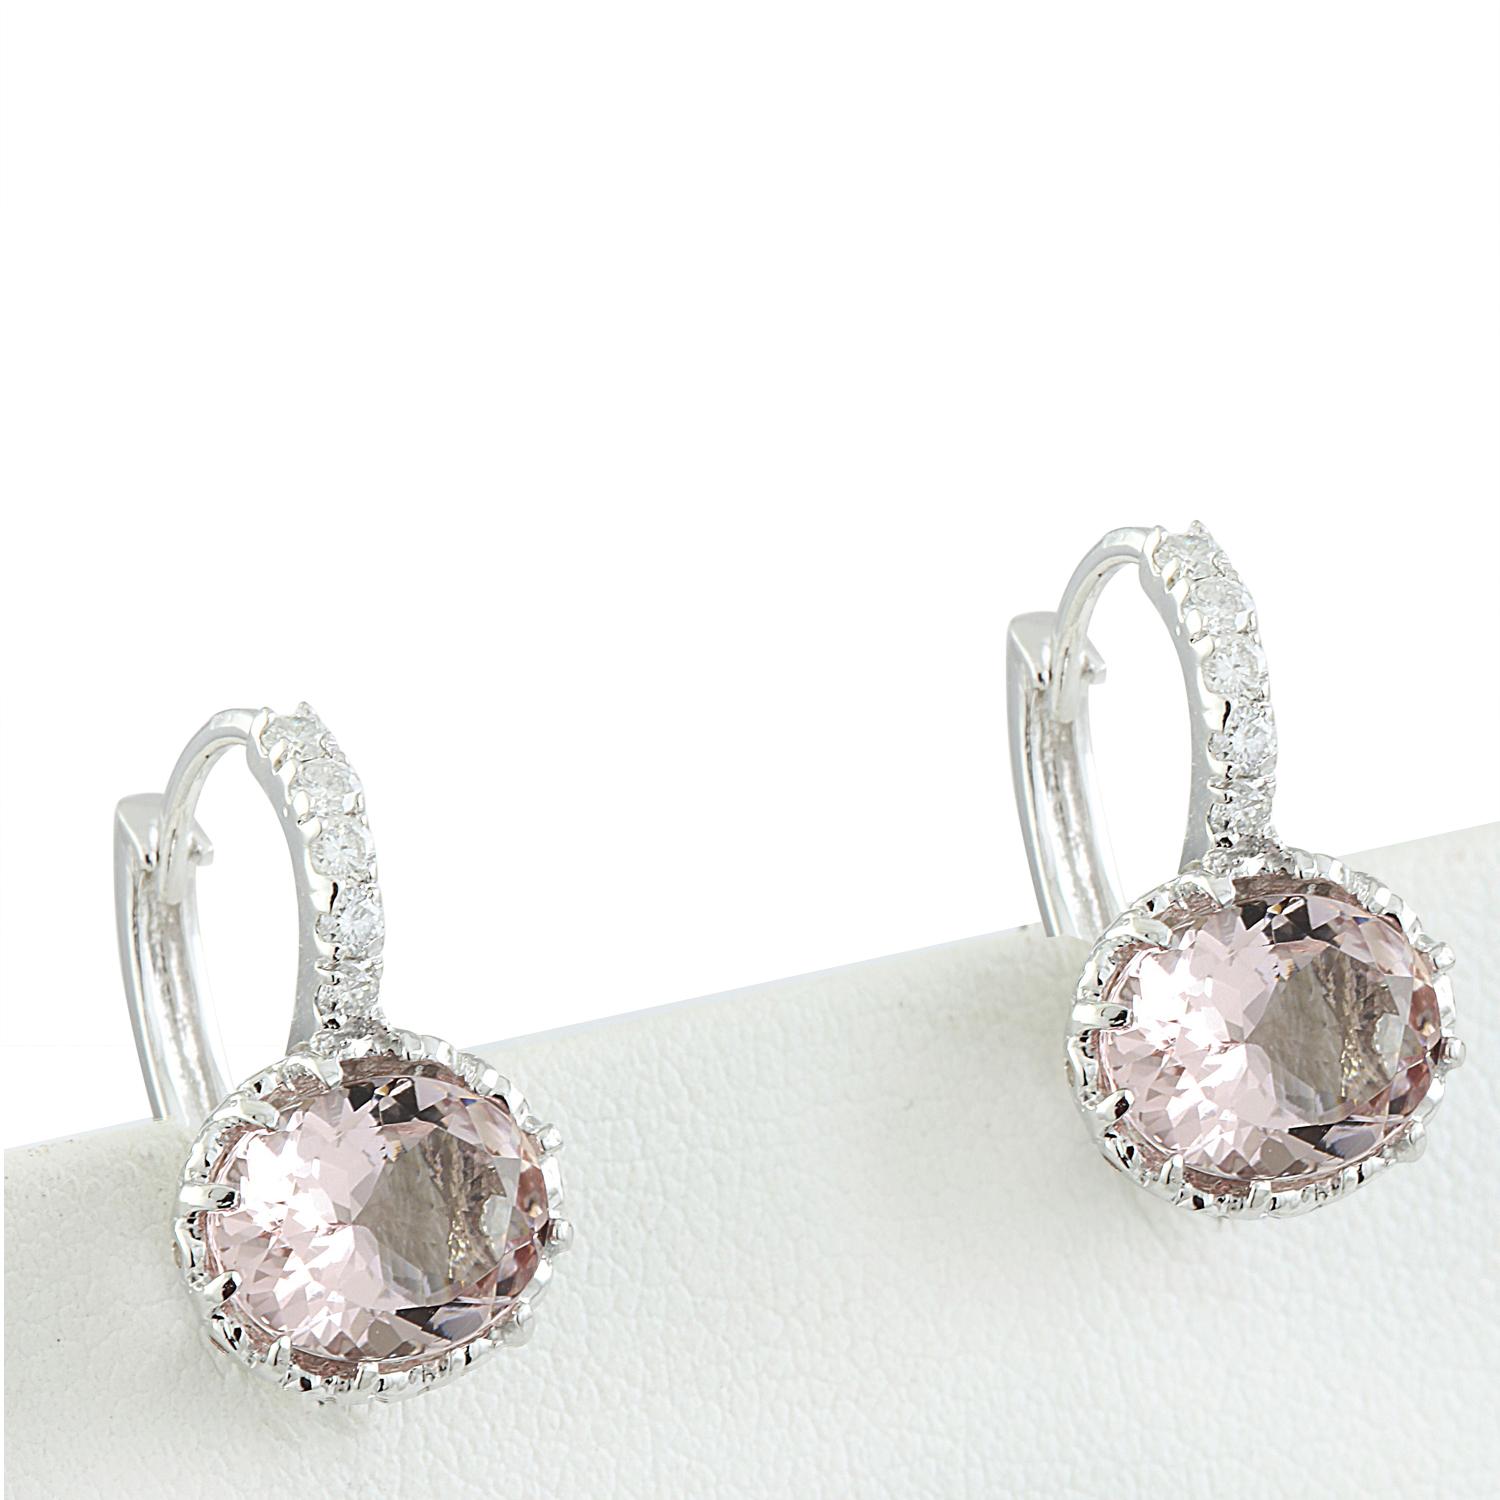 Introducing a mesmerizing pair of earrings that exude elegance and sophistication - the 3.65 Carat Natural Morganite 14 Karat Solid White Gold Diamond Earrings. Crafted to perfection these earrings are a true statement of luxury.

These earrings